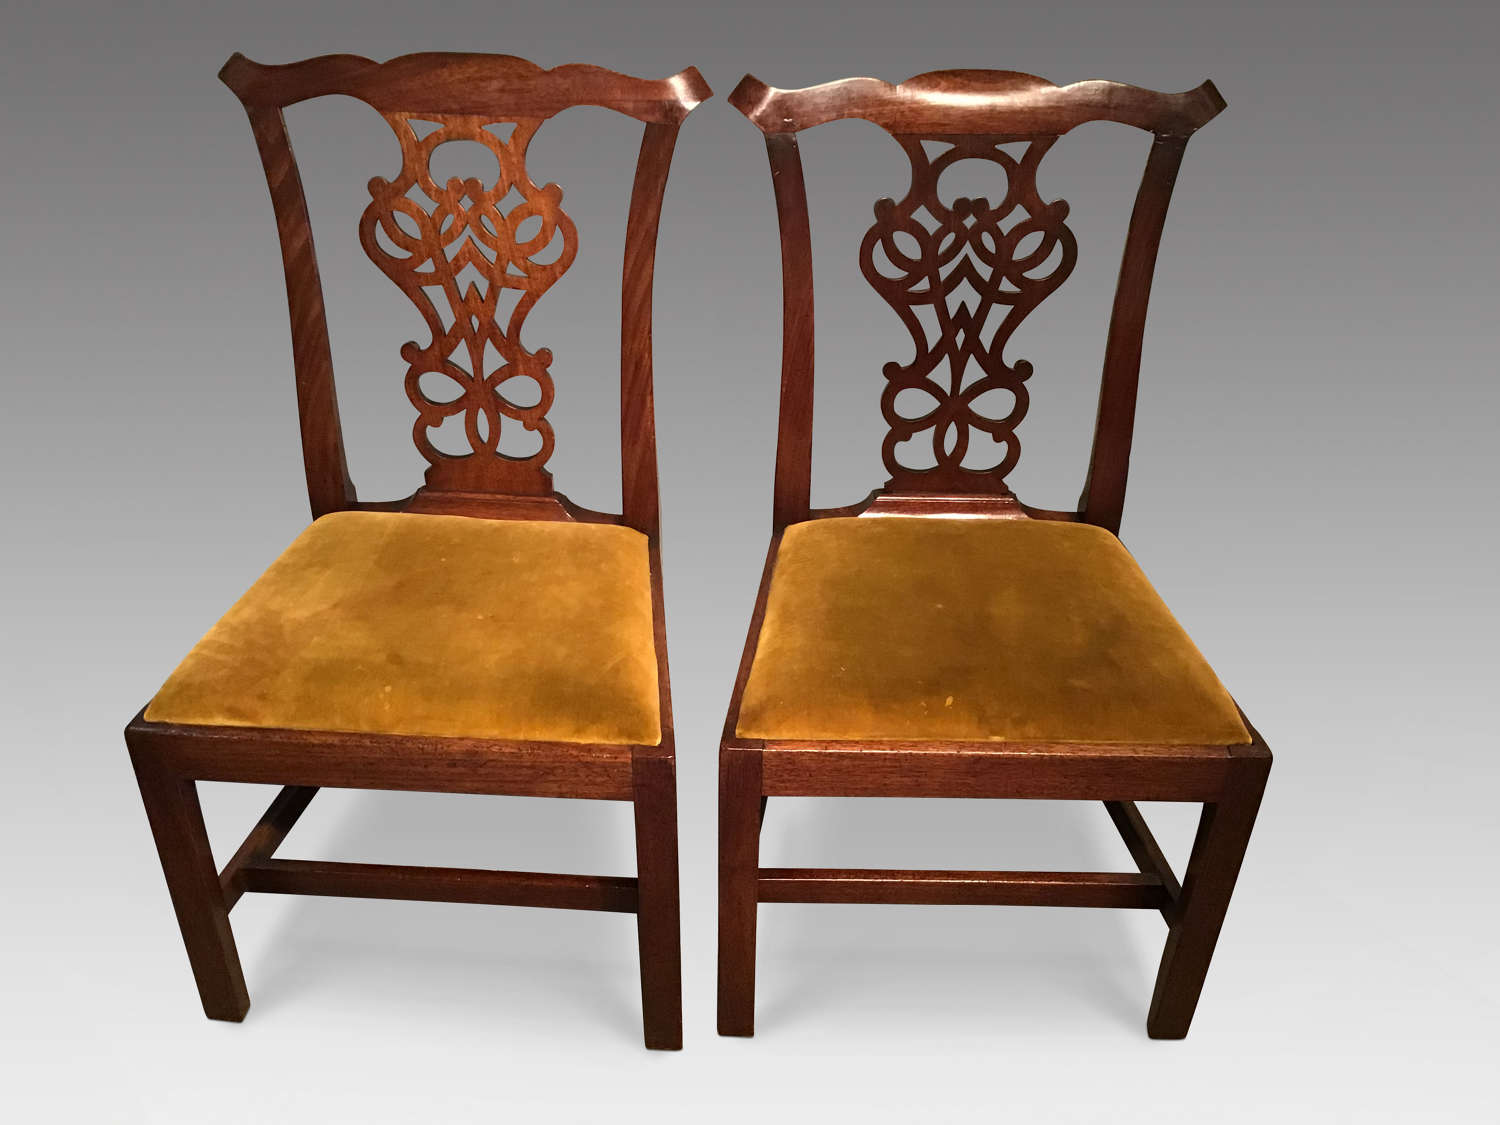 Pair of antique mahogany chairs